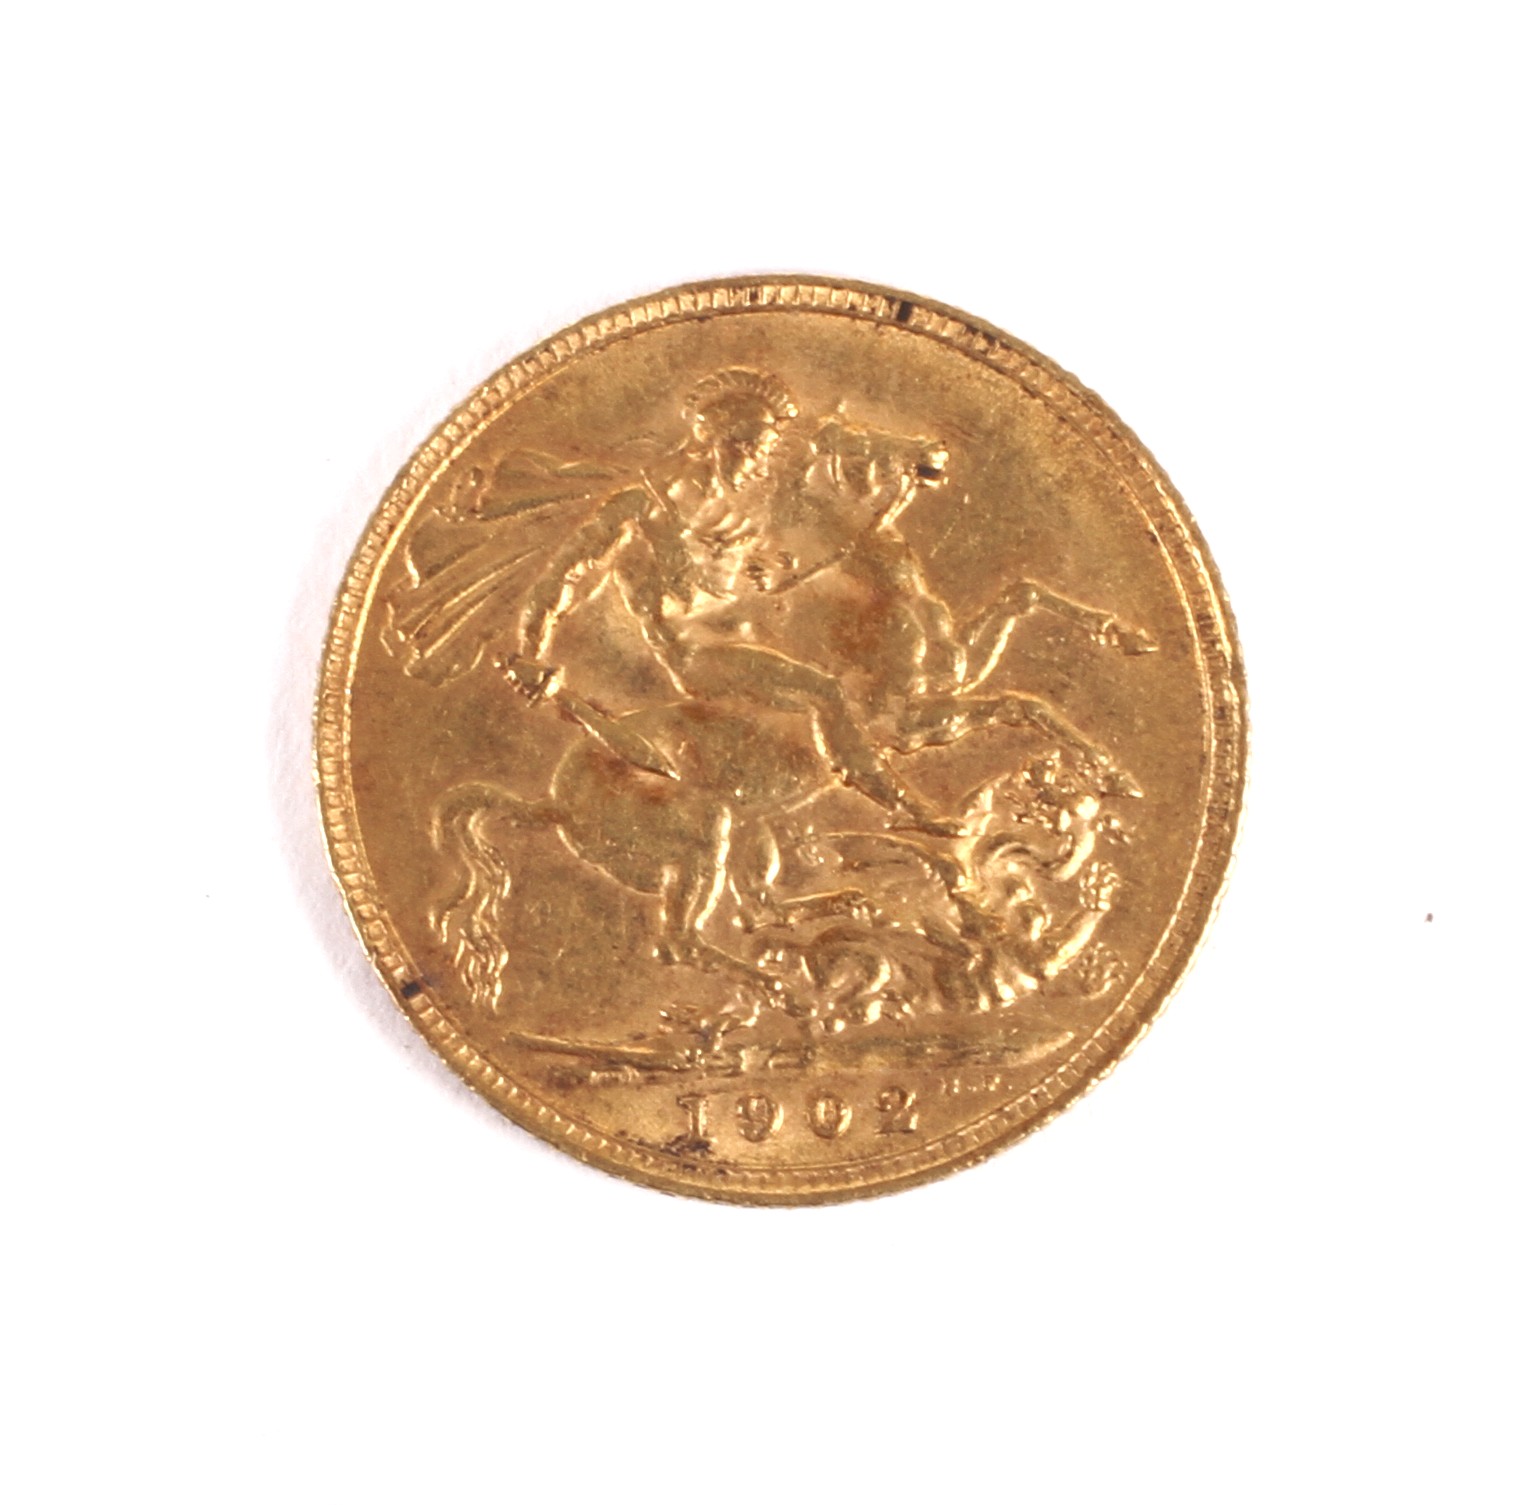 A 1902 gold sovereign coin. - Image 2 of 2